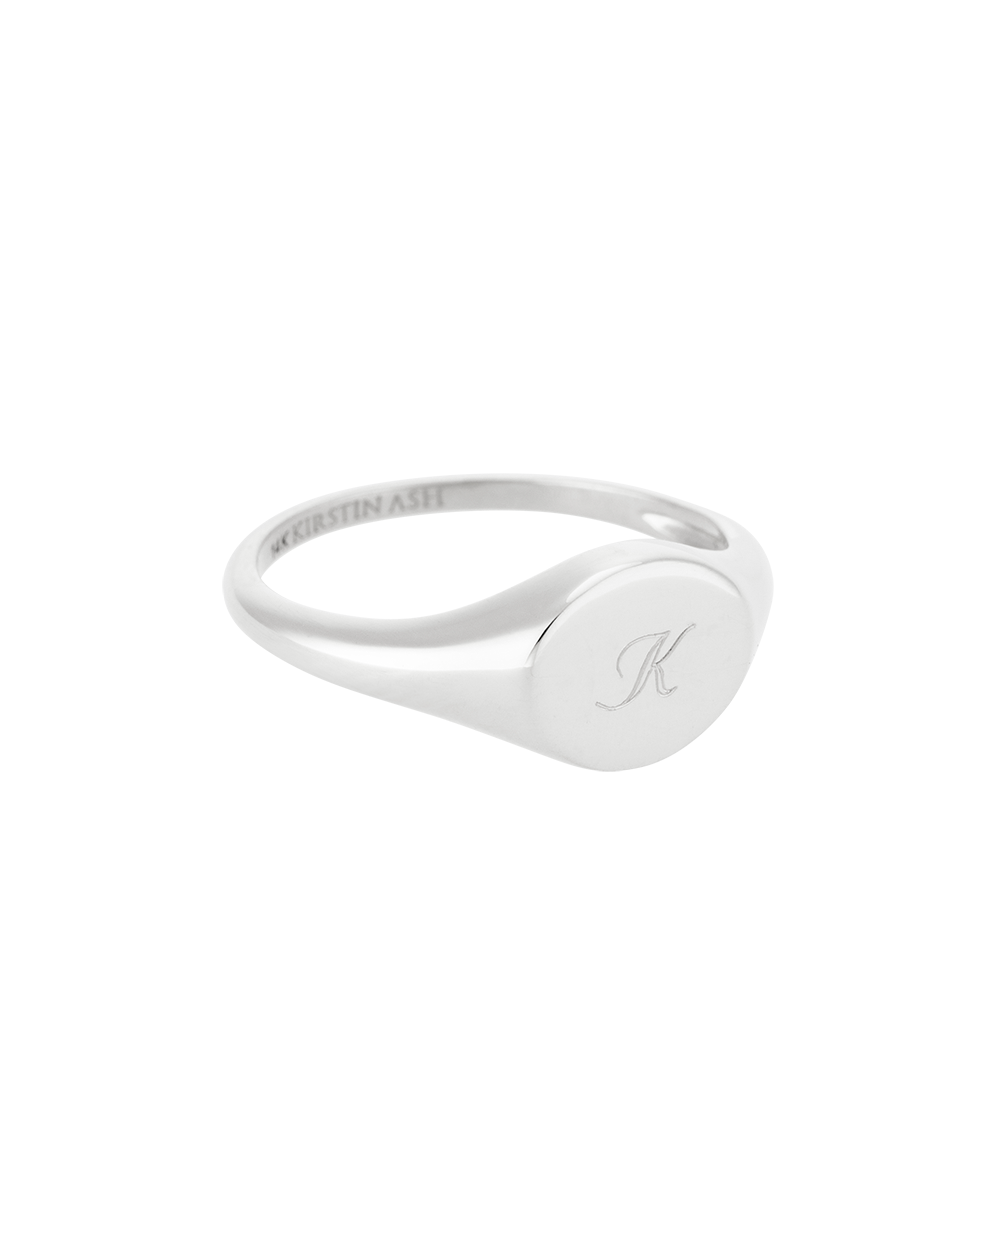 CLASSIC SIGNET RING (STERLING SILVER) - IMAGE 4